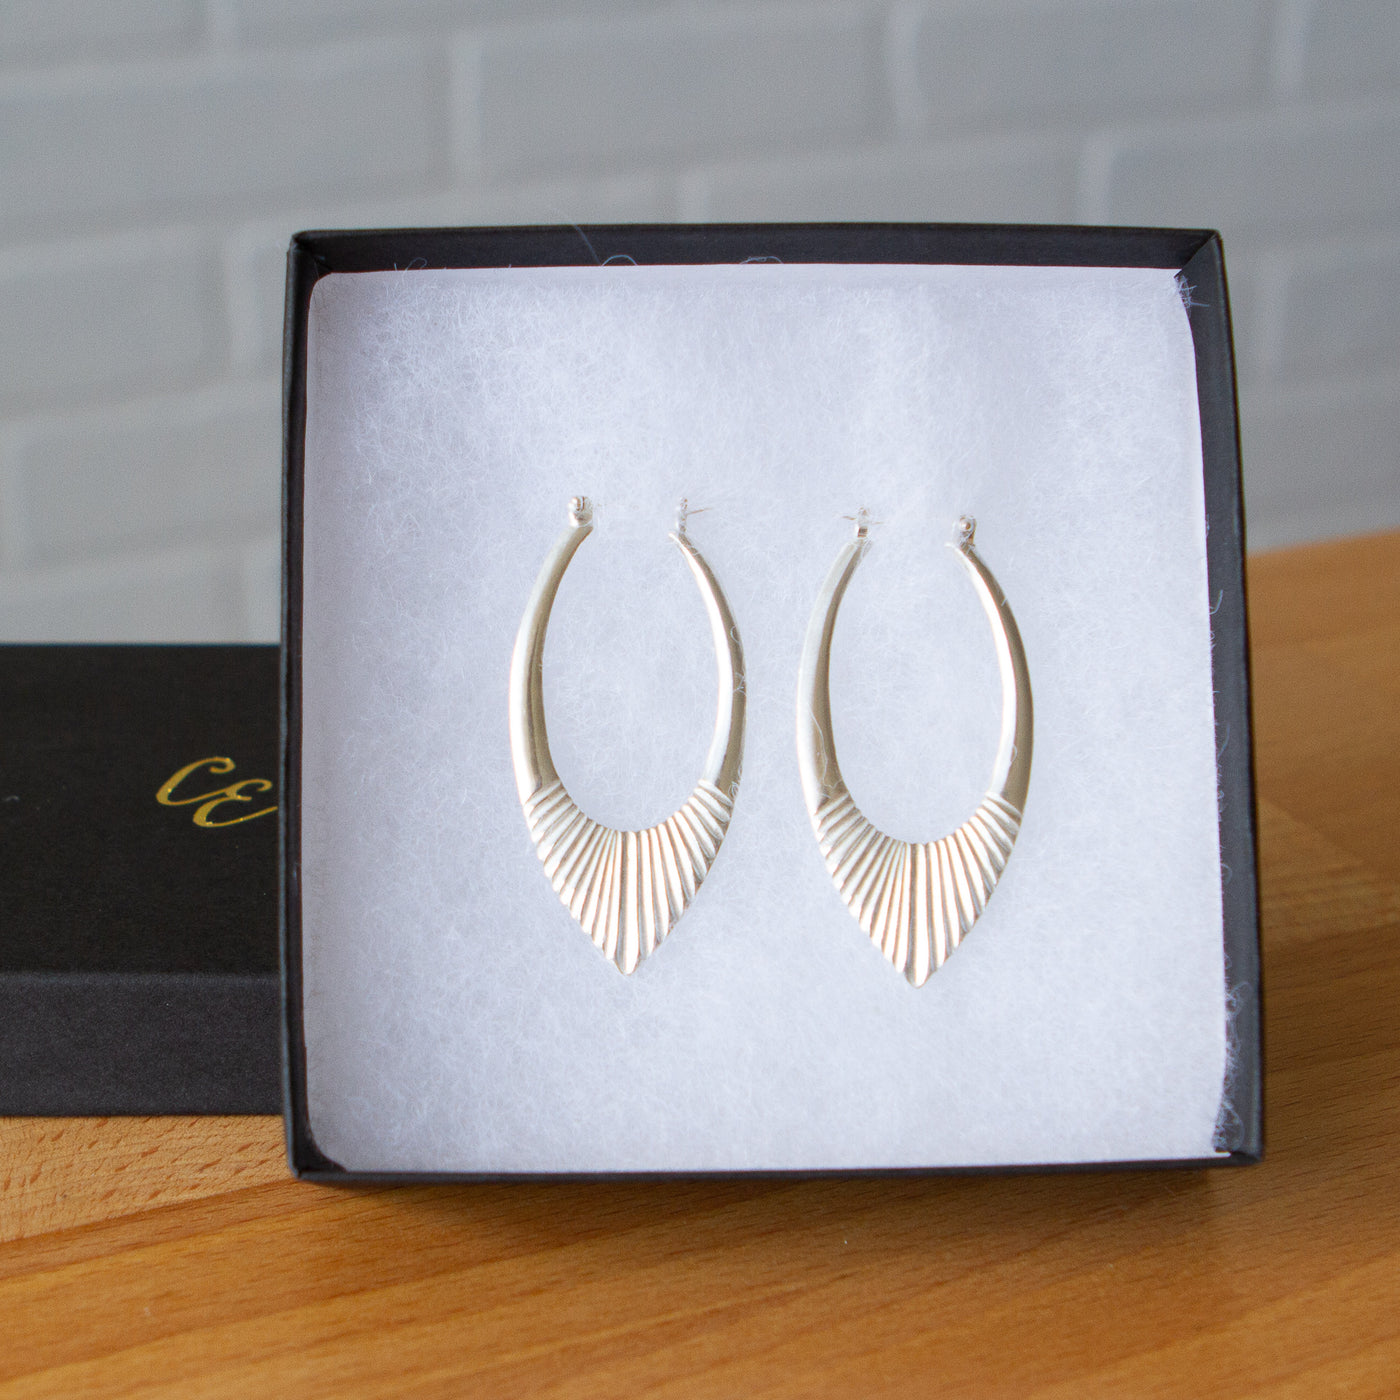 Large Silver Helios Hoops by Corey Egan in a gift box